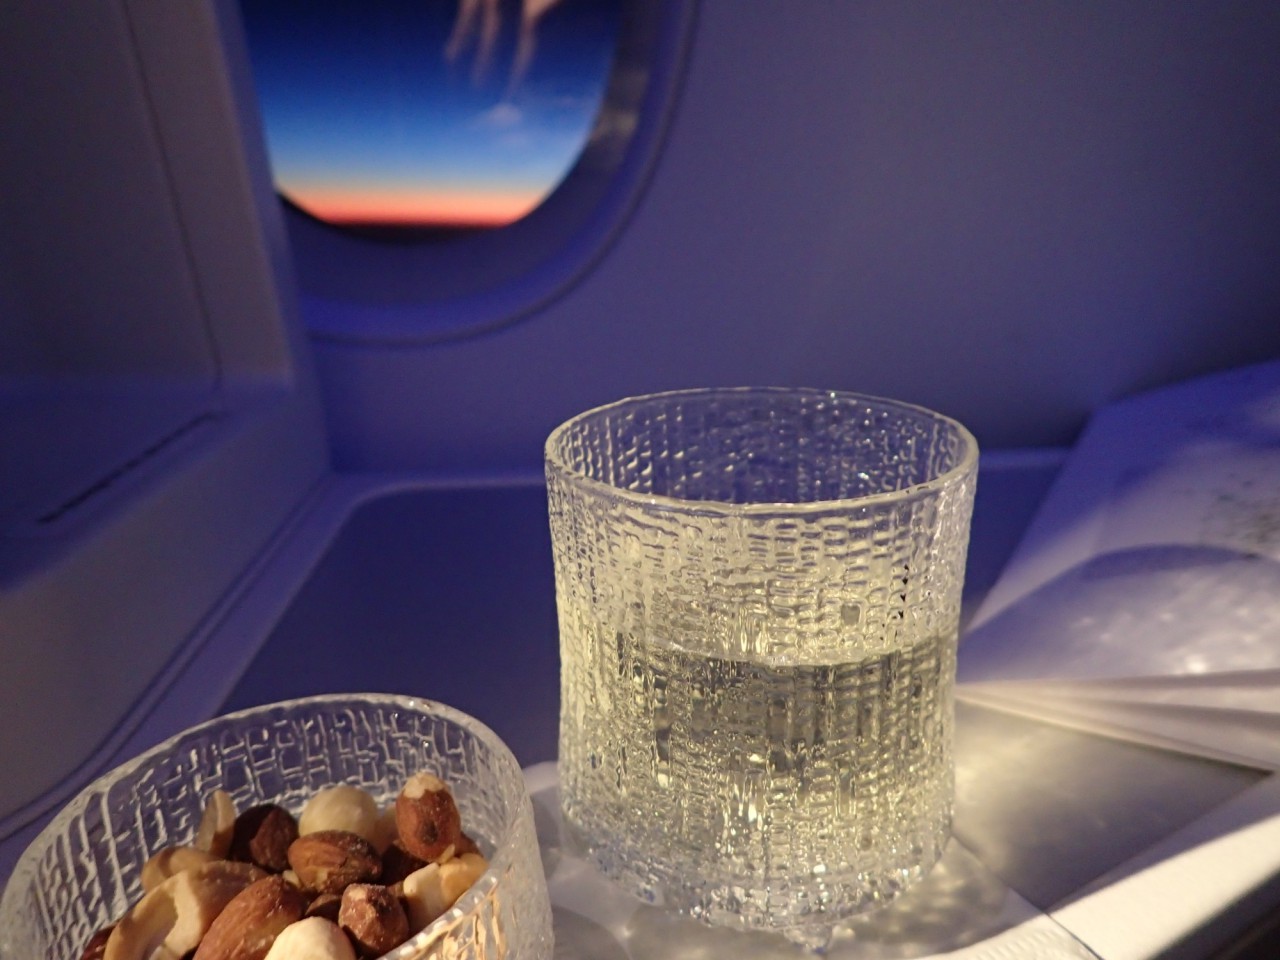 Finnair Business Class Review: Warmed Mixed Nuts and Water